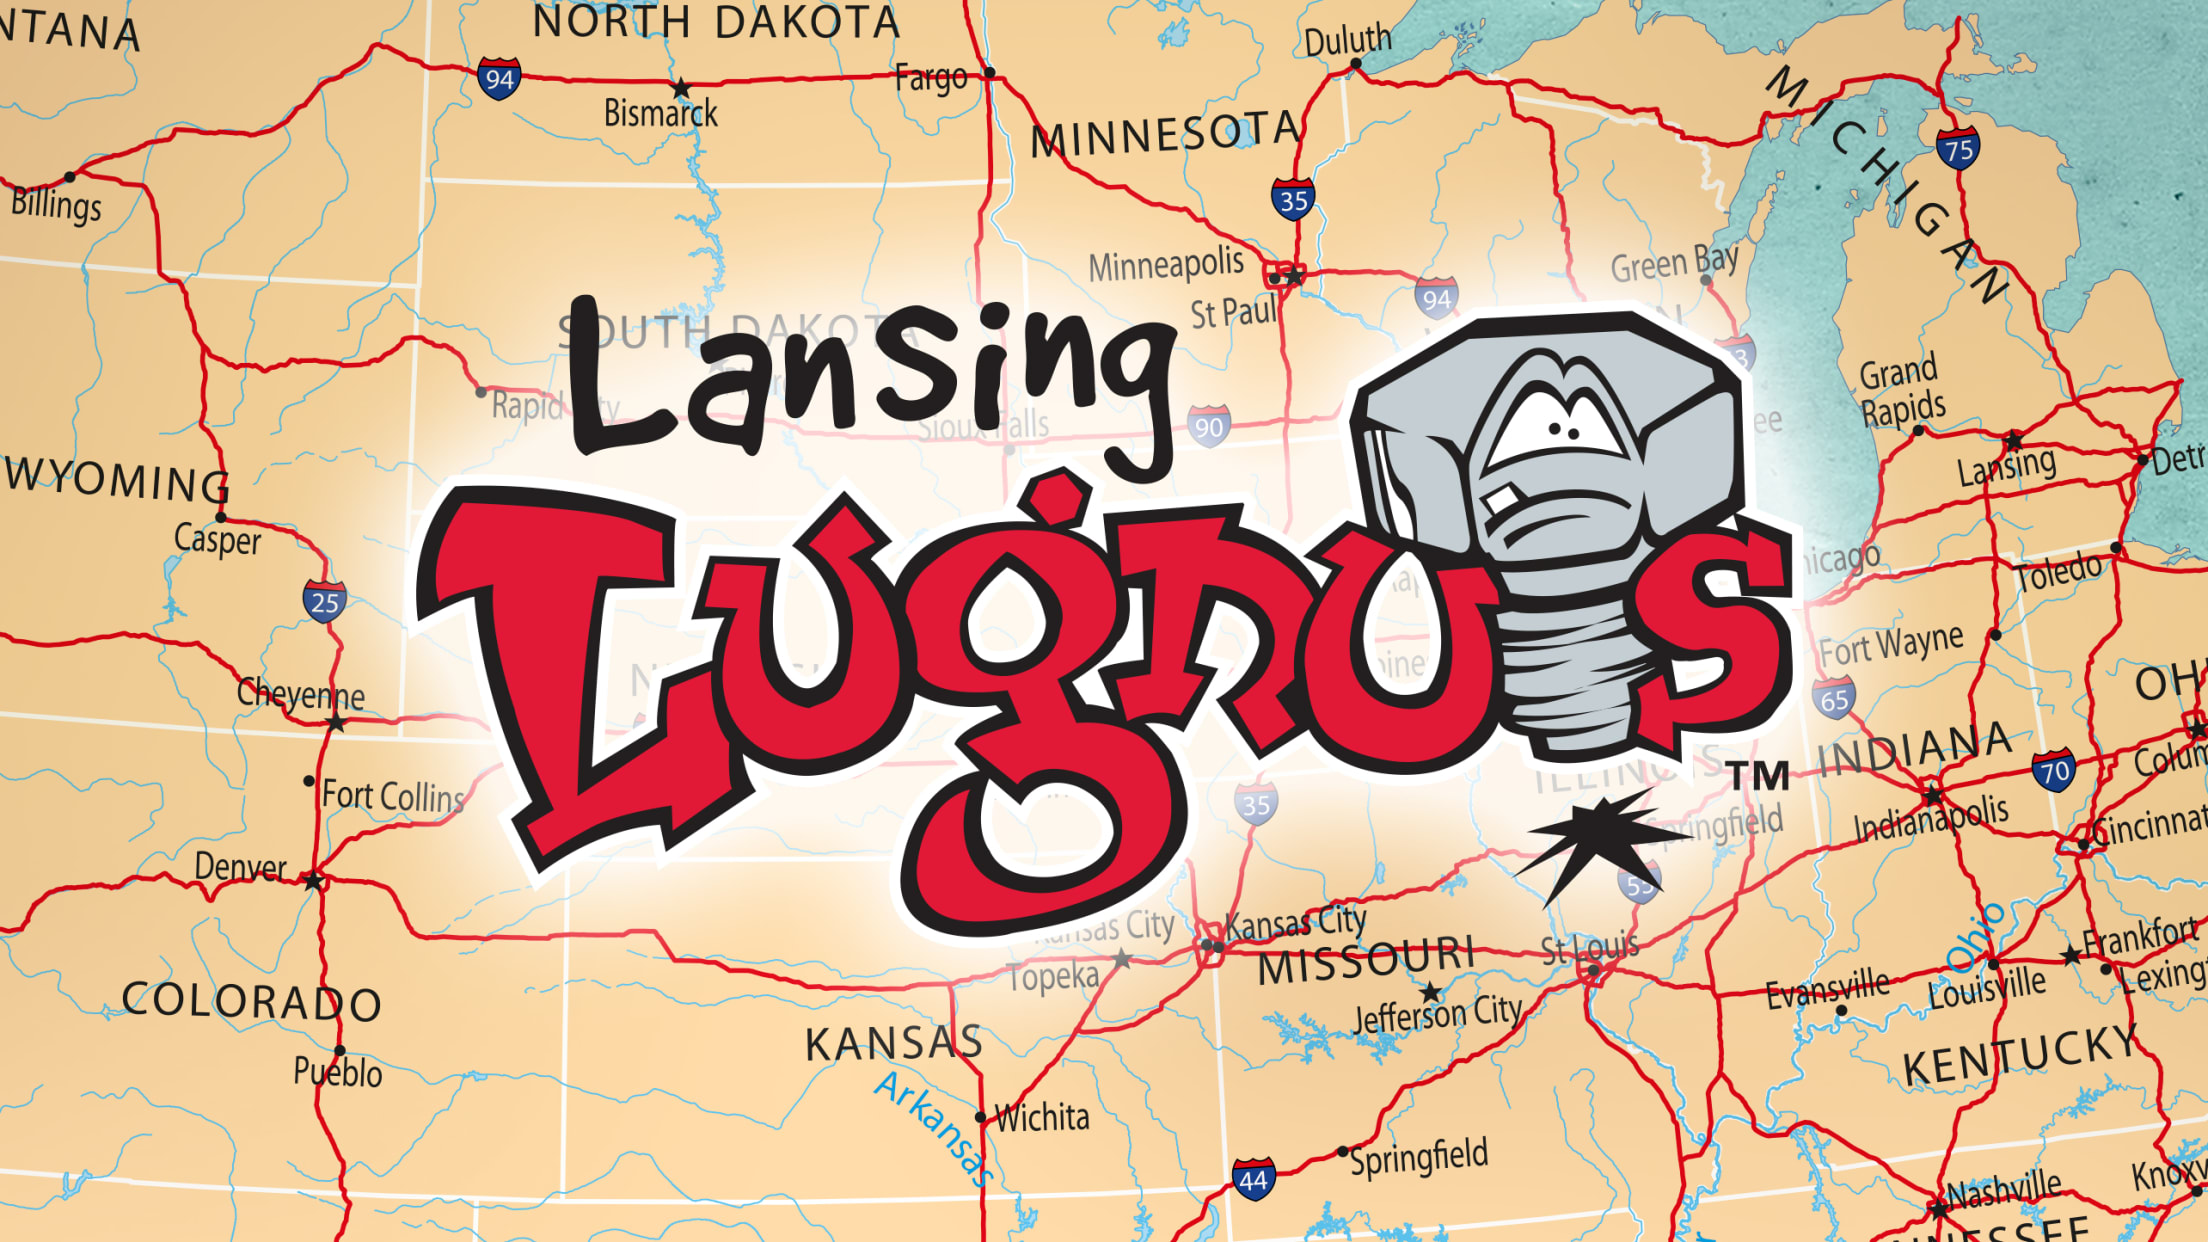 Lansing Lugnuts refresh look with two new logos